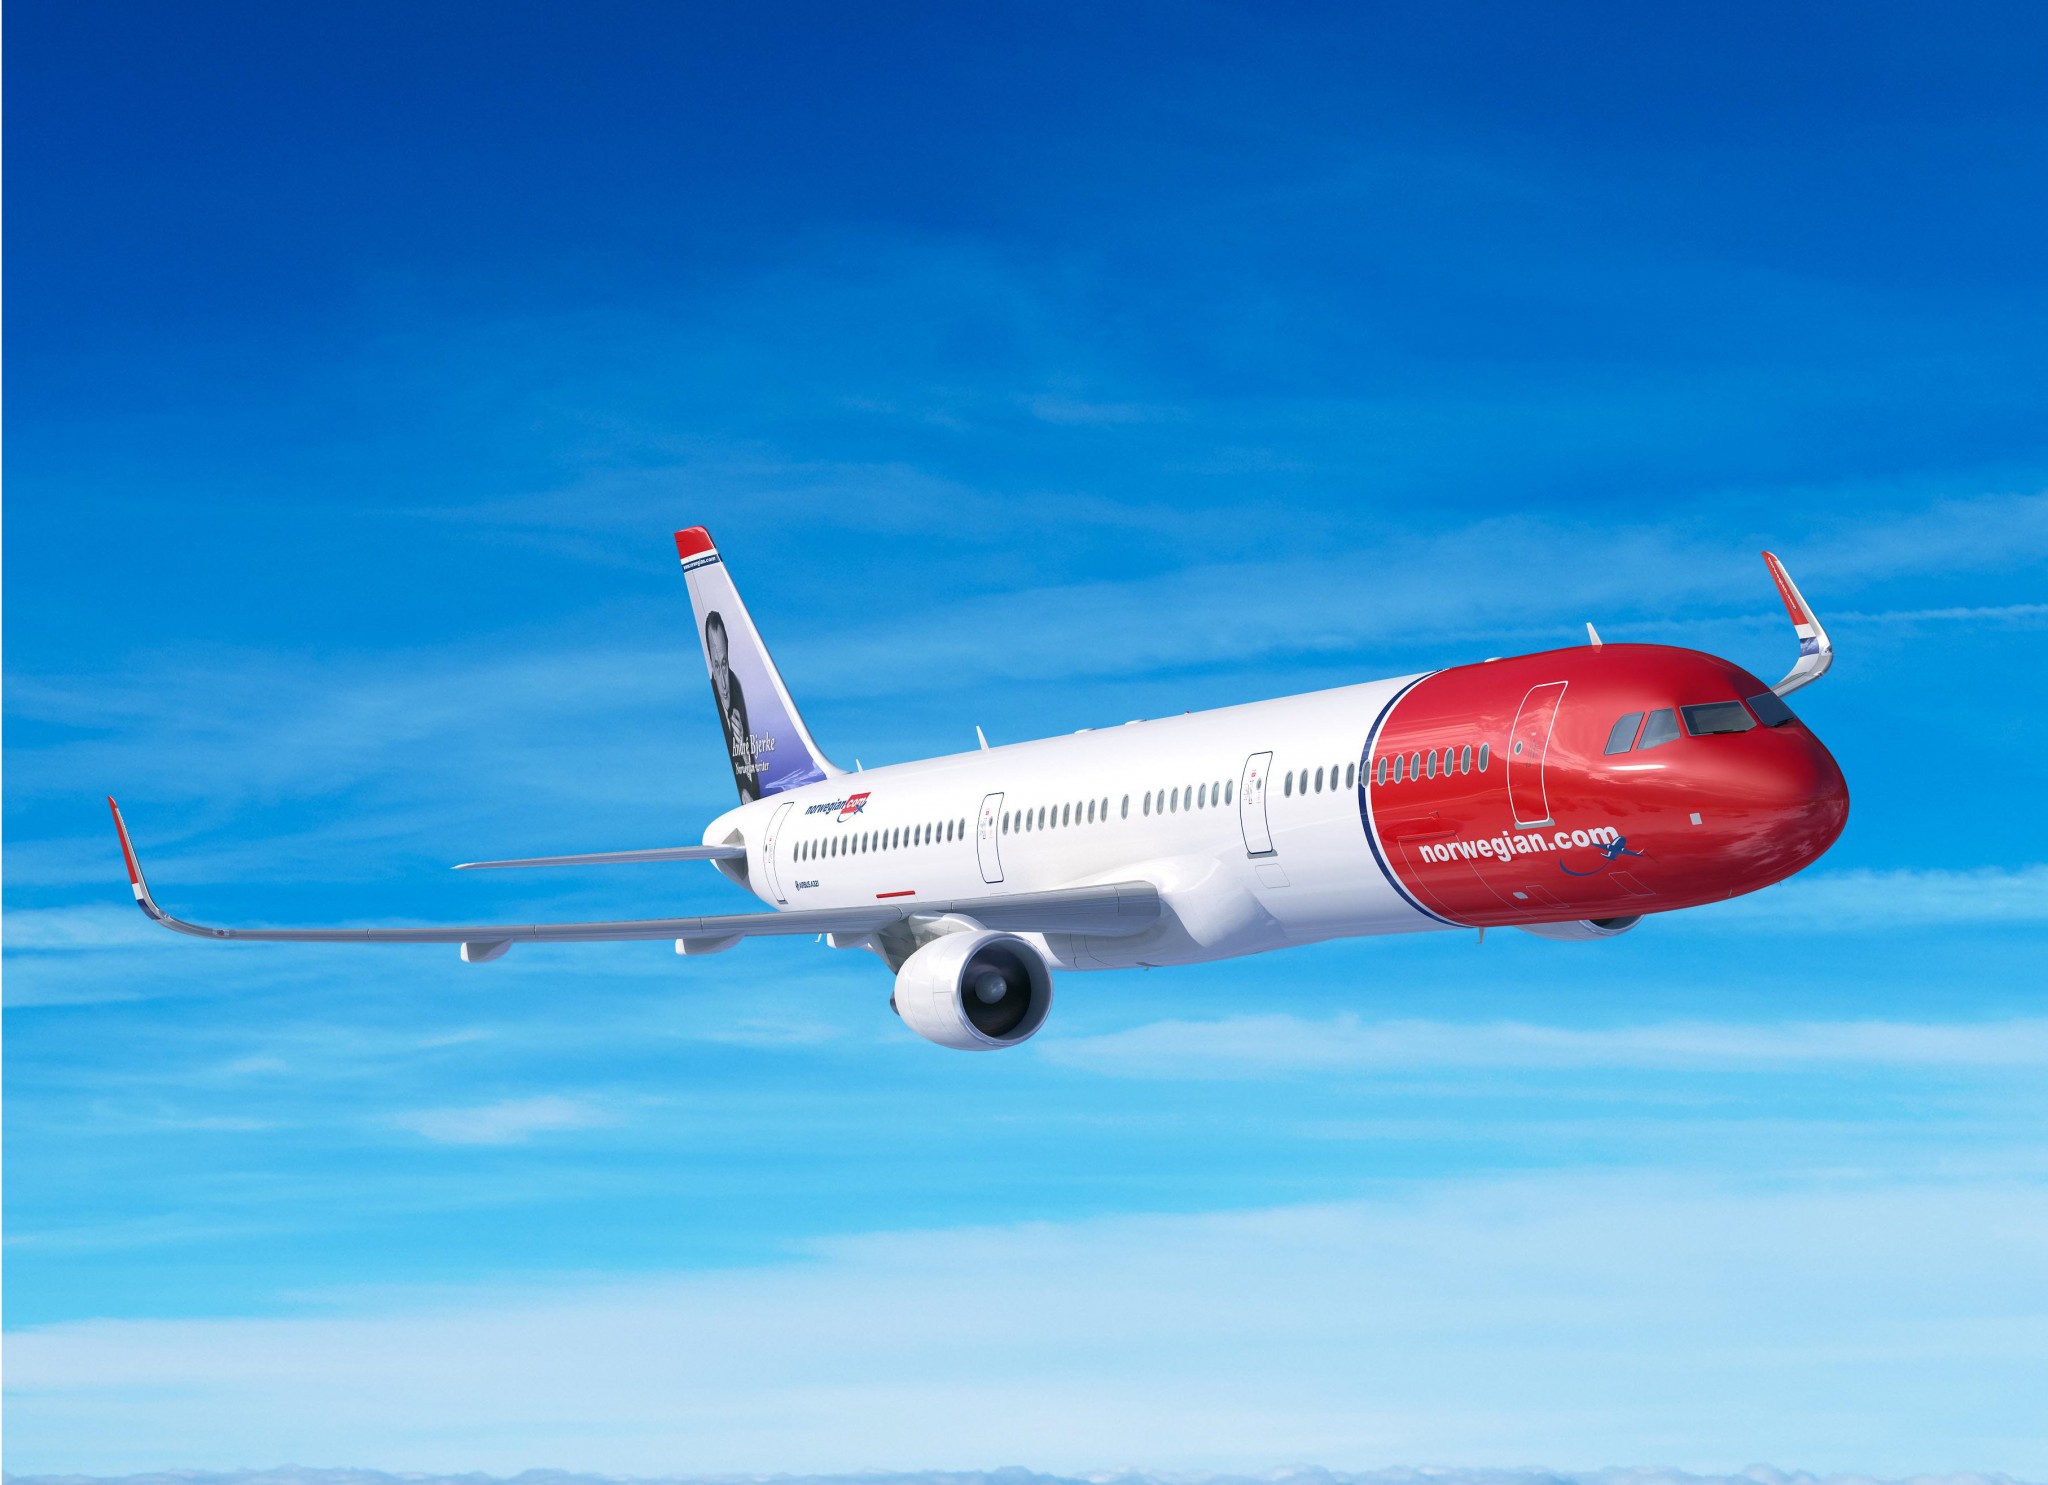 Norwegian launches UK’s first low-cost route to South America